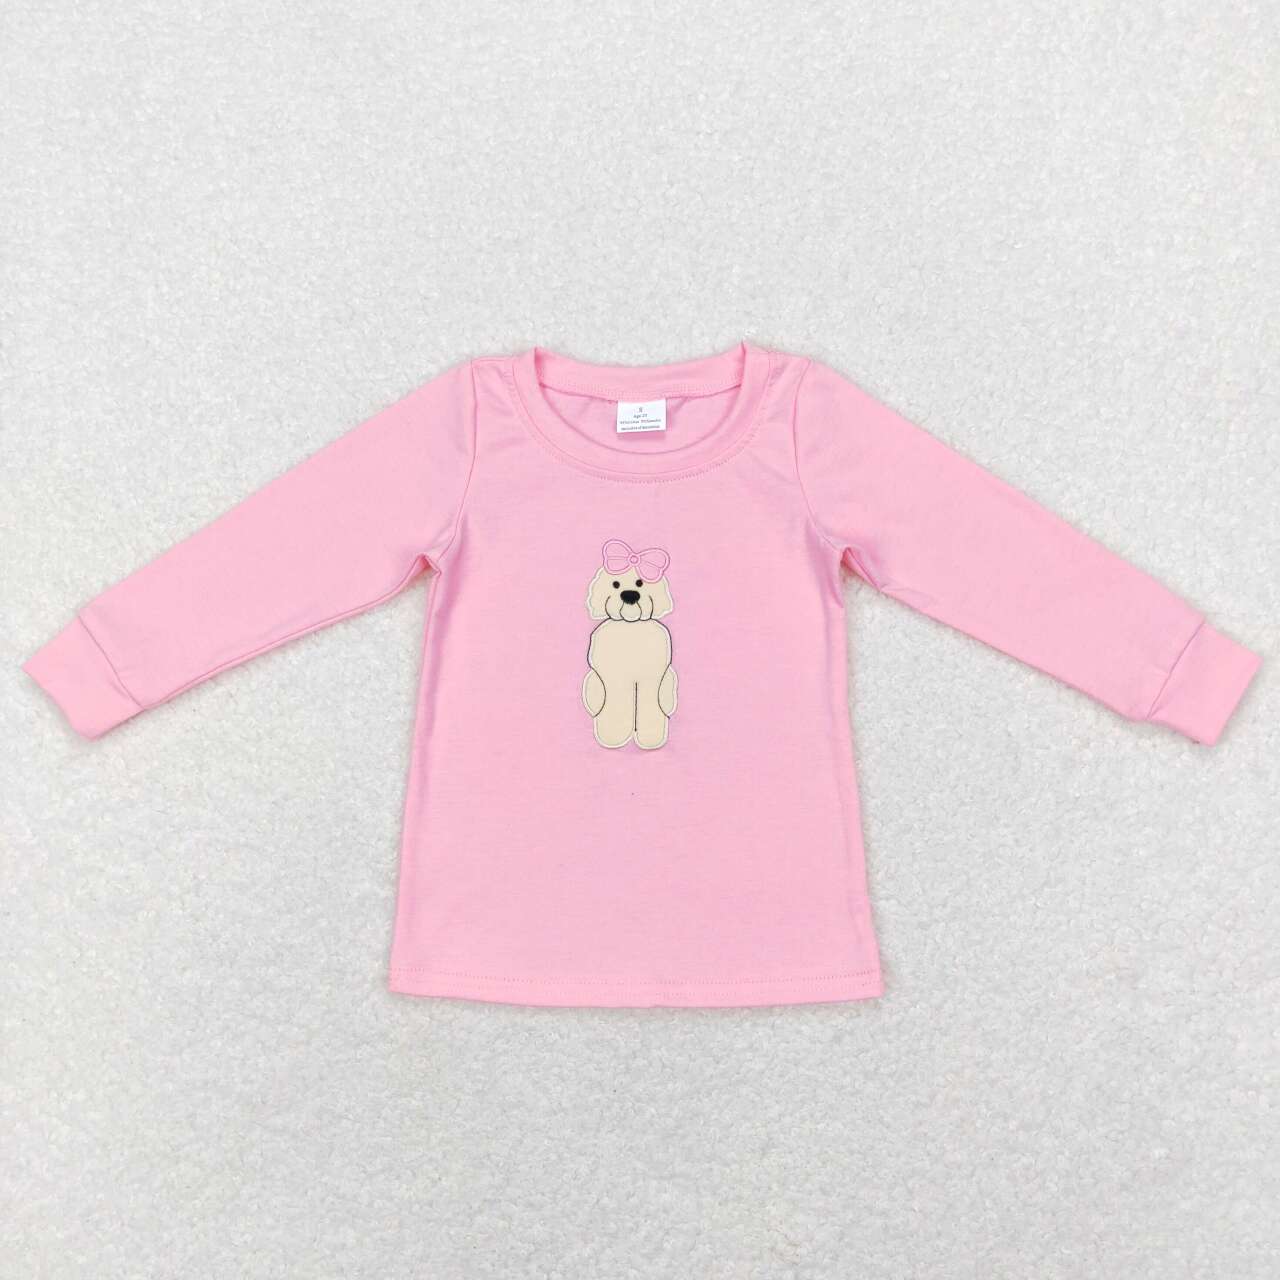 GLP1147 Pink Dog Embroidery Top Stripes Denim Jeans Girls Clothes Set